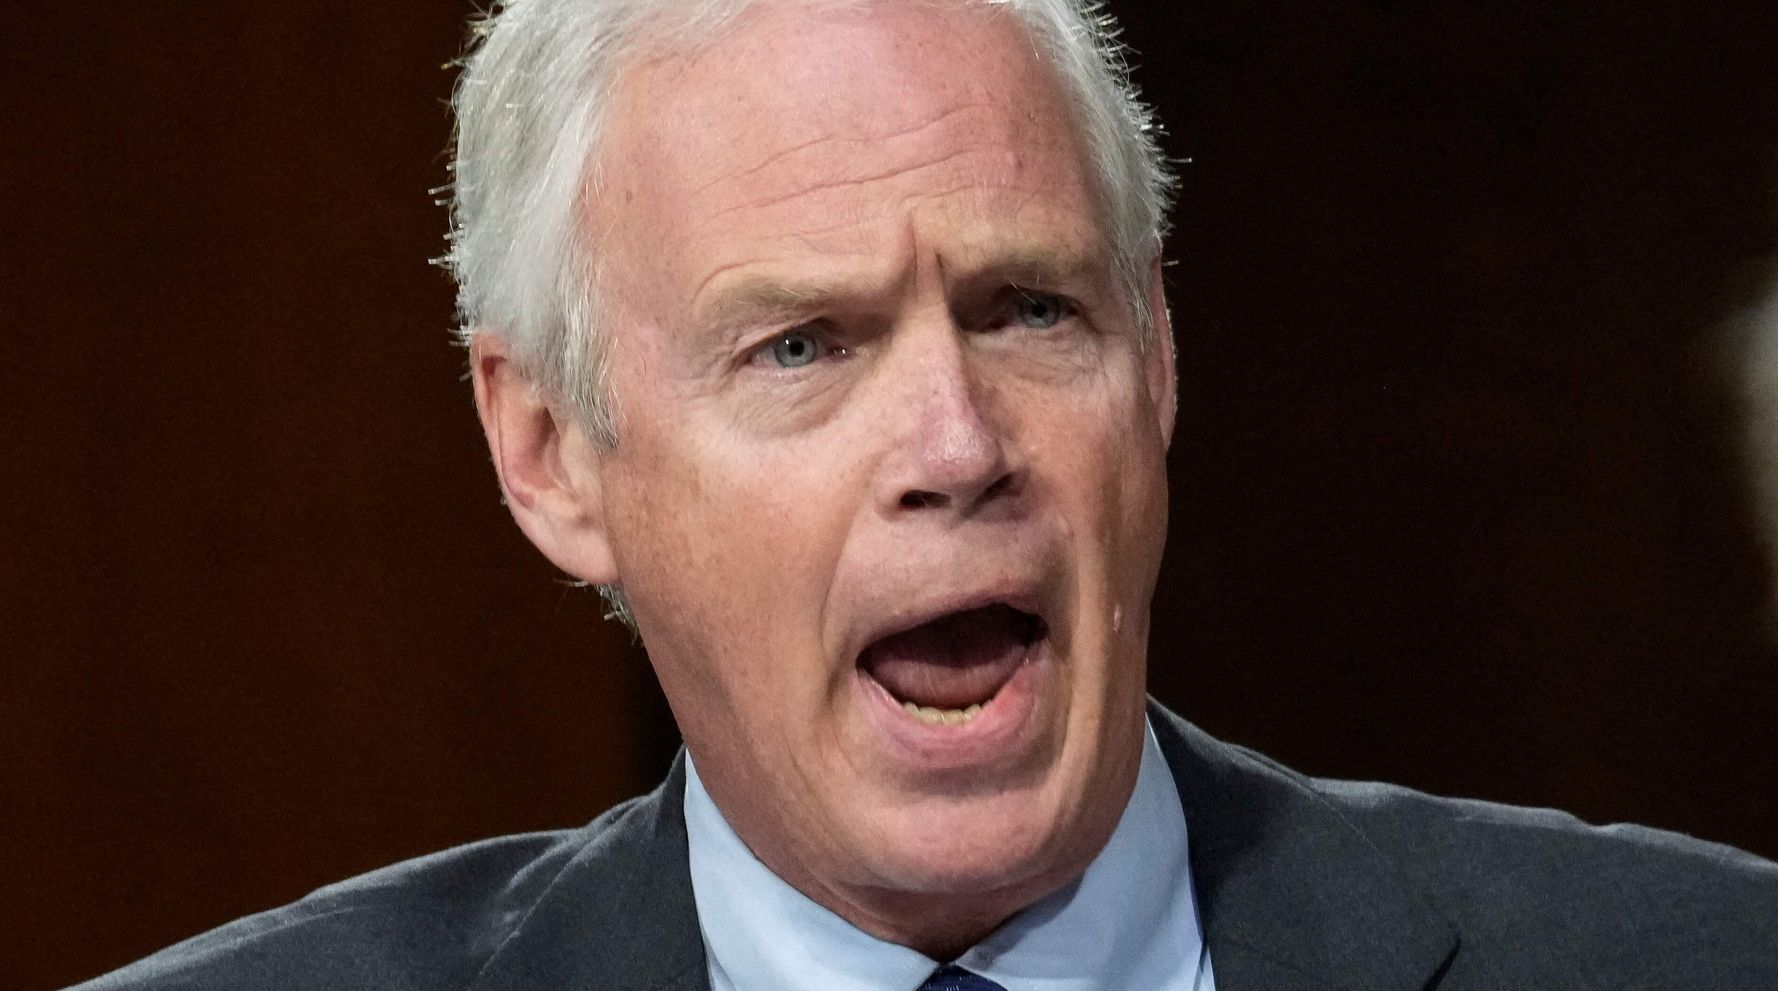 Sen. Ron Johnson Says Fauci 'Overhyped' AIDS Just Like COVID-19 | HuffPost Latest News